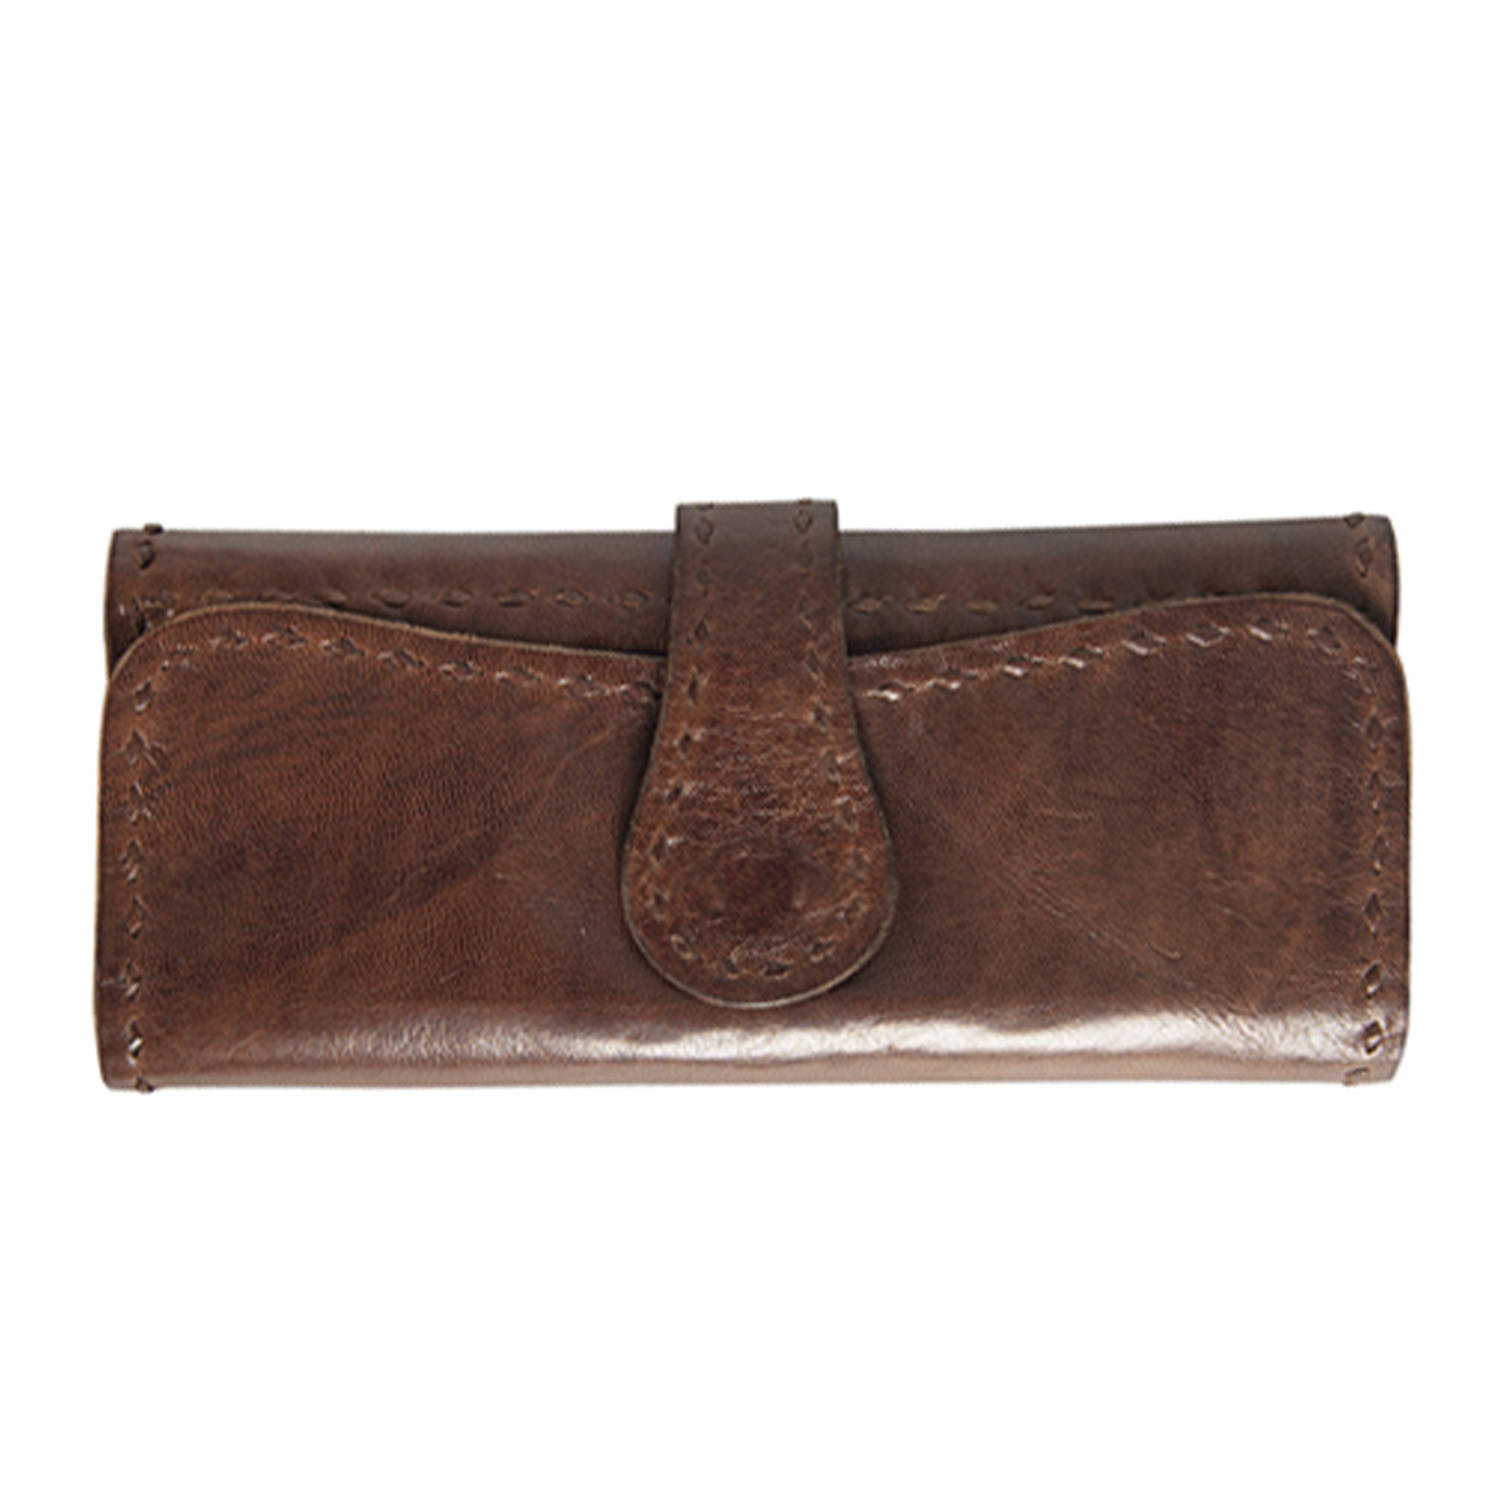 ID Stronghold | RFID Wallet Women's Trifold